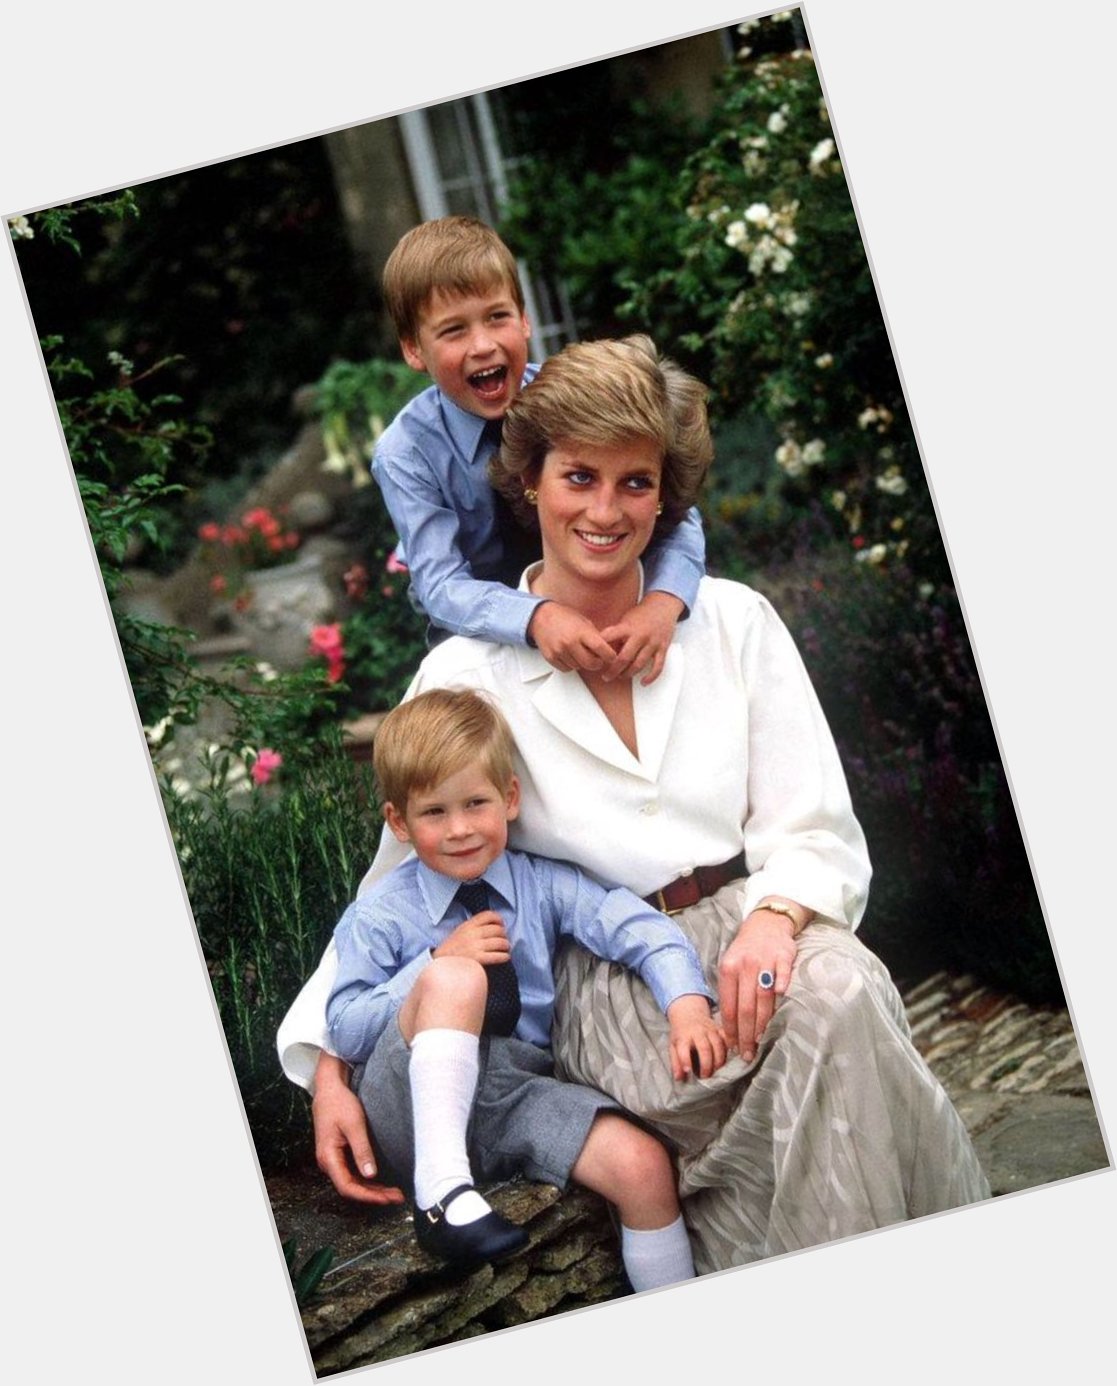 Happy birthday Princess Diana! The best there ever was.   